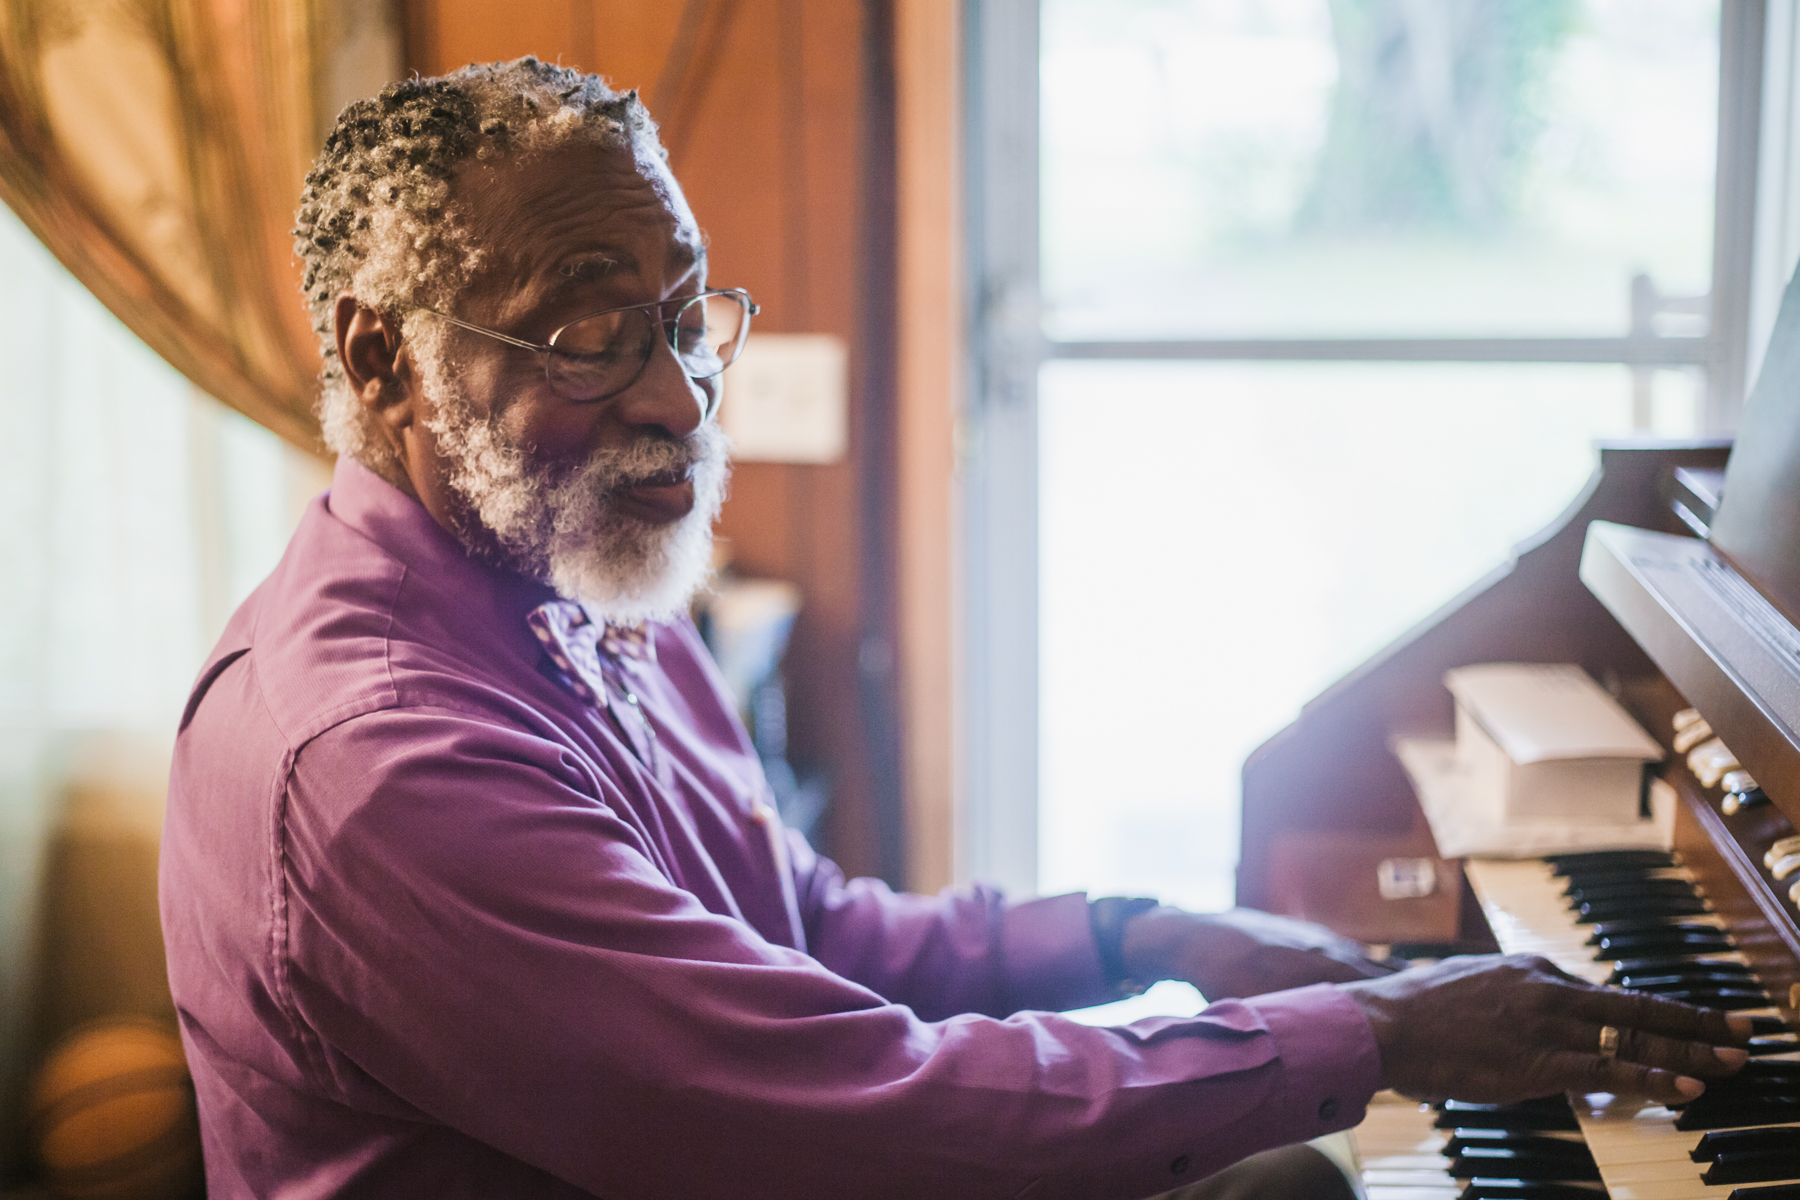  Dr. Collins’ religious résumé is robust: he’s the minister of music and organist at Franklintown United Methodist Church in Fernandina Beach, Florida. He is also a shamash (the equivalent of a deacon in the Christian tradition) at the First Tabernac